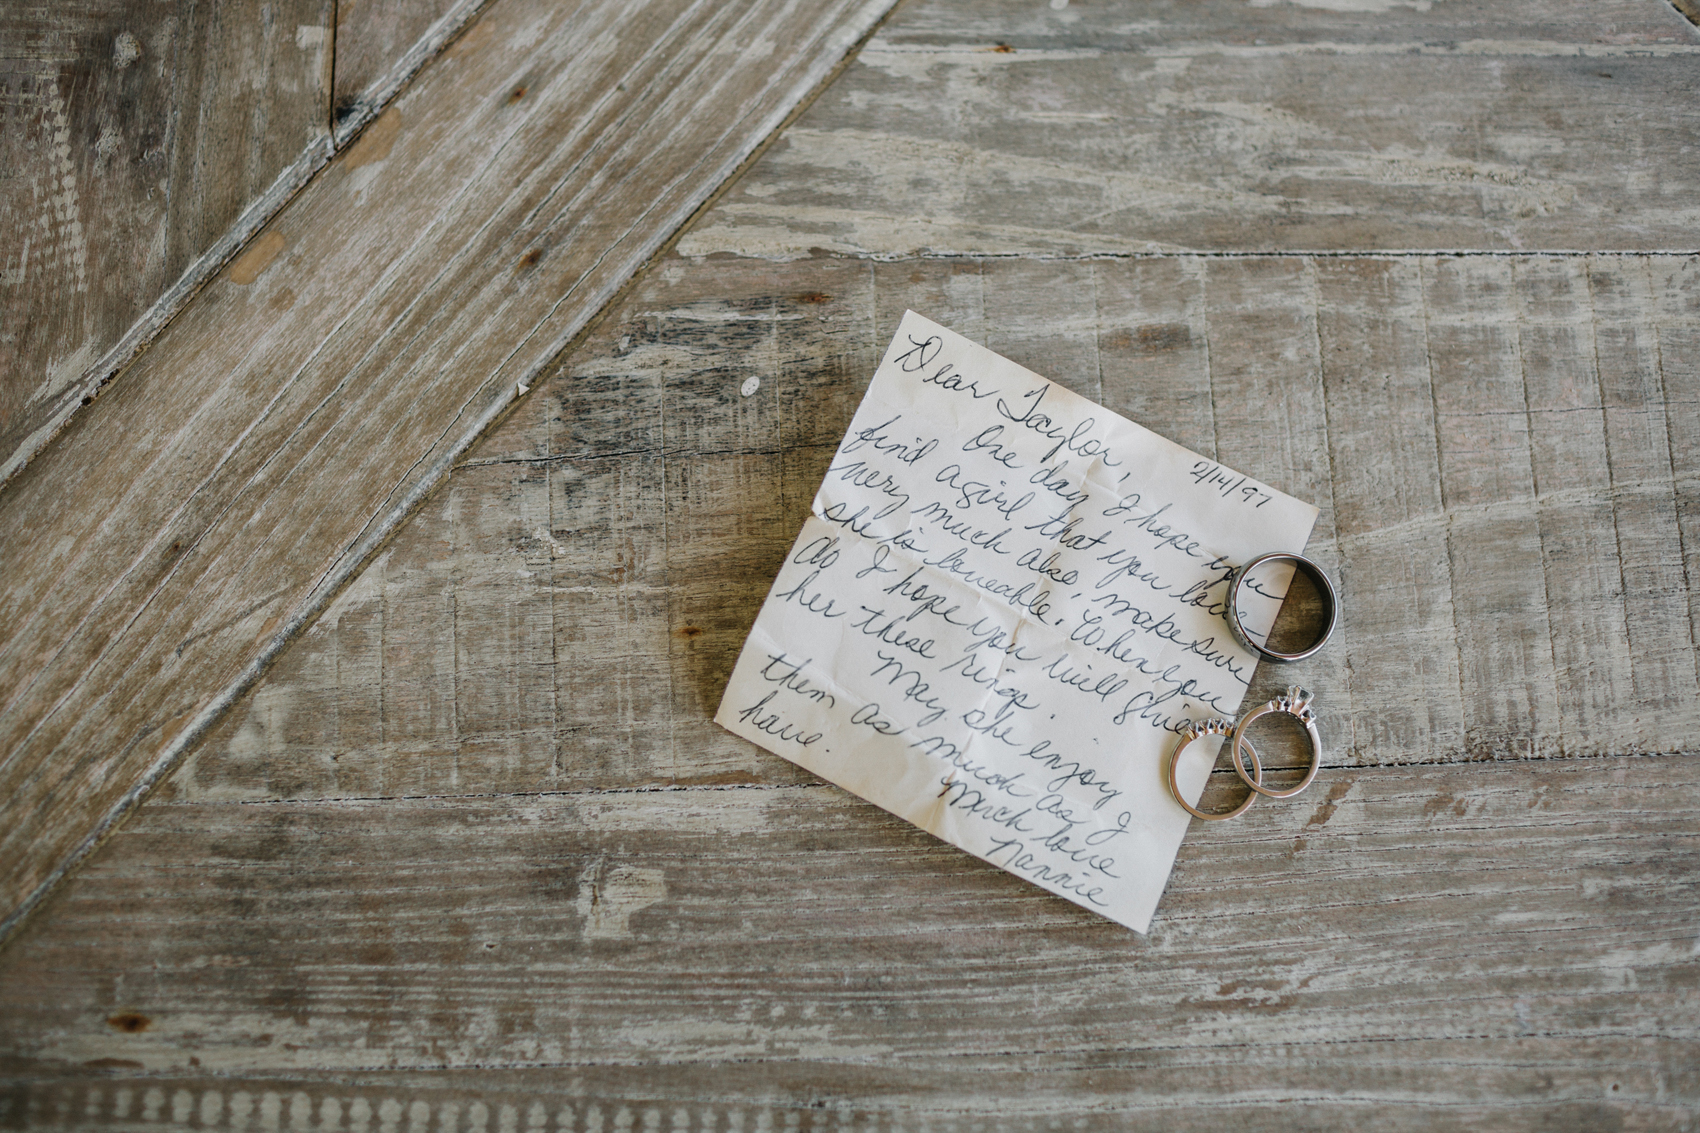 heirloom wedding rings from the grandmother of the groom with a handwritten note